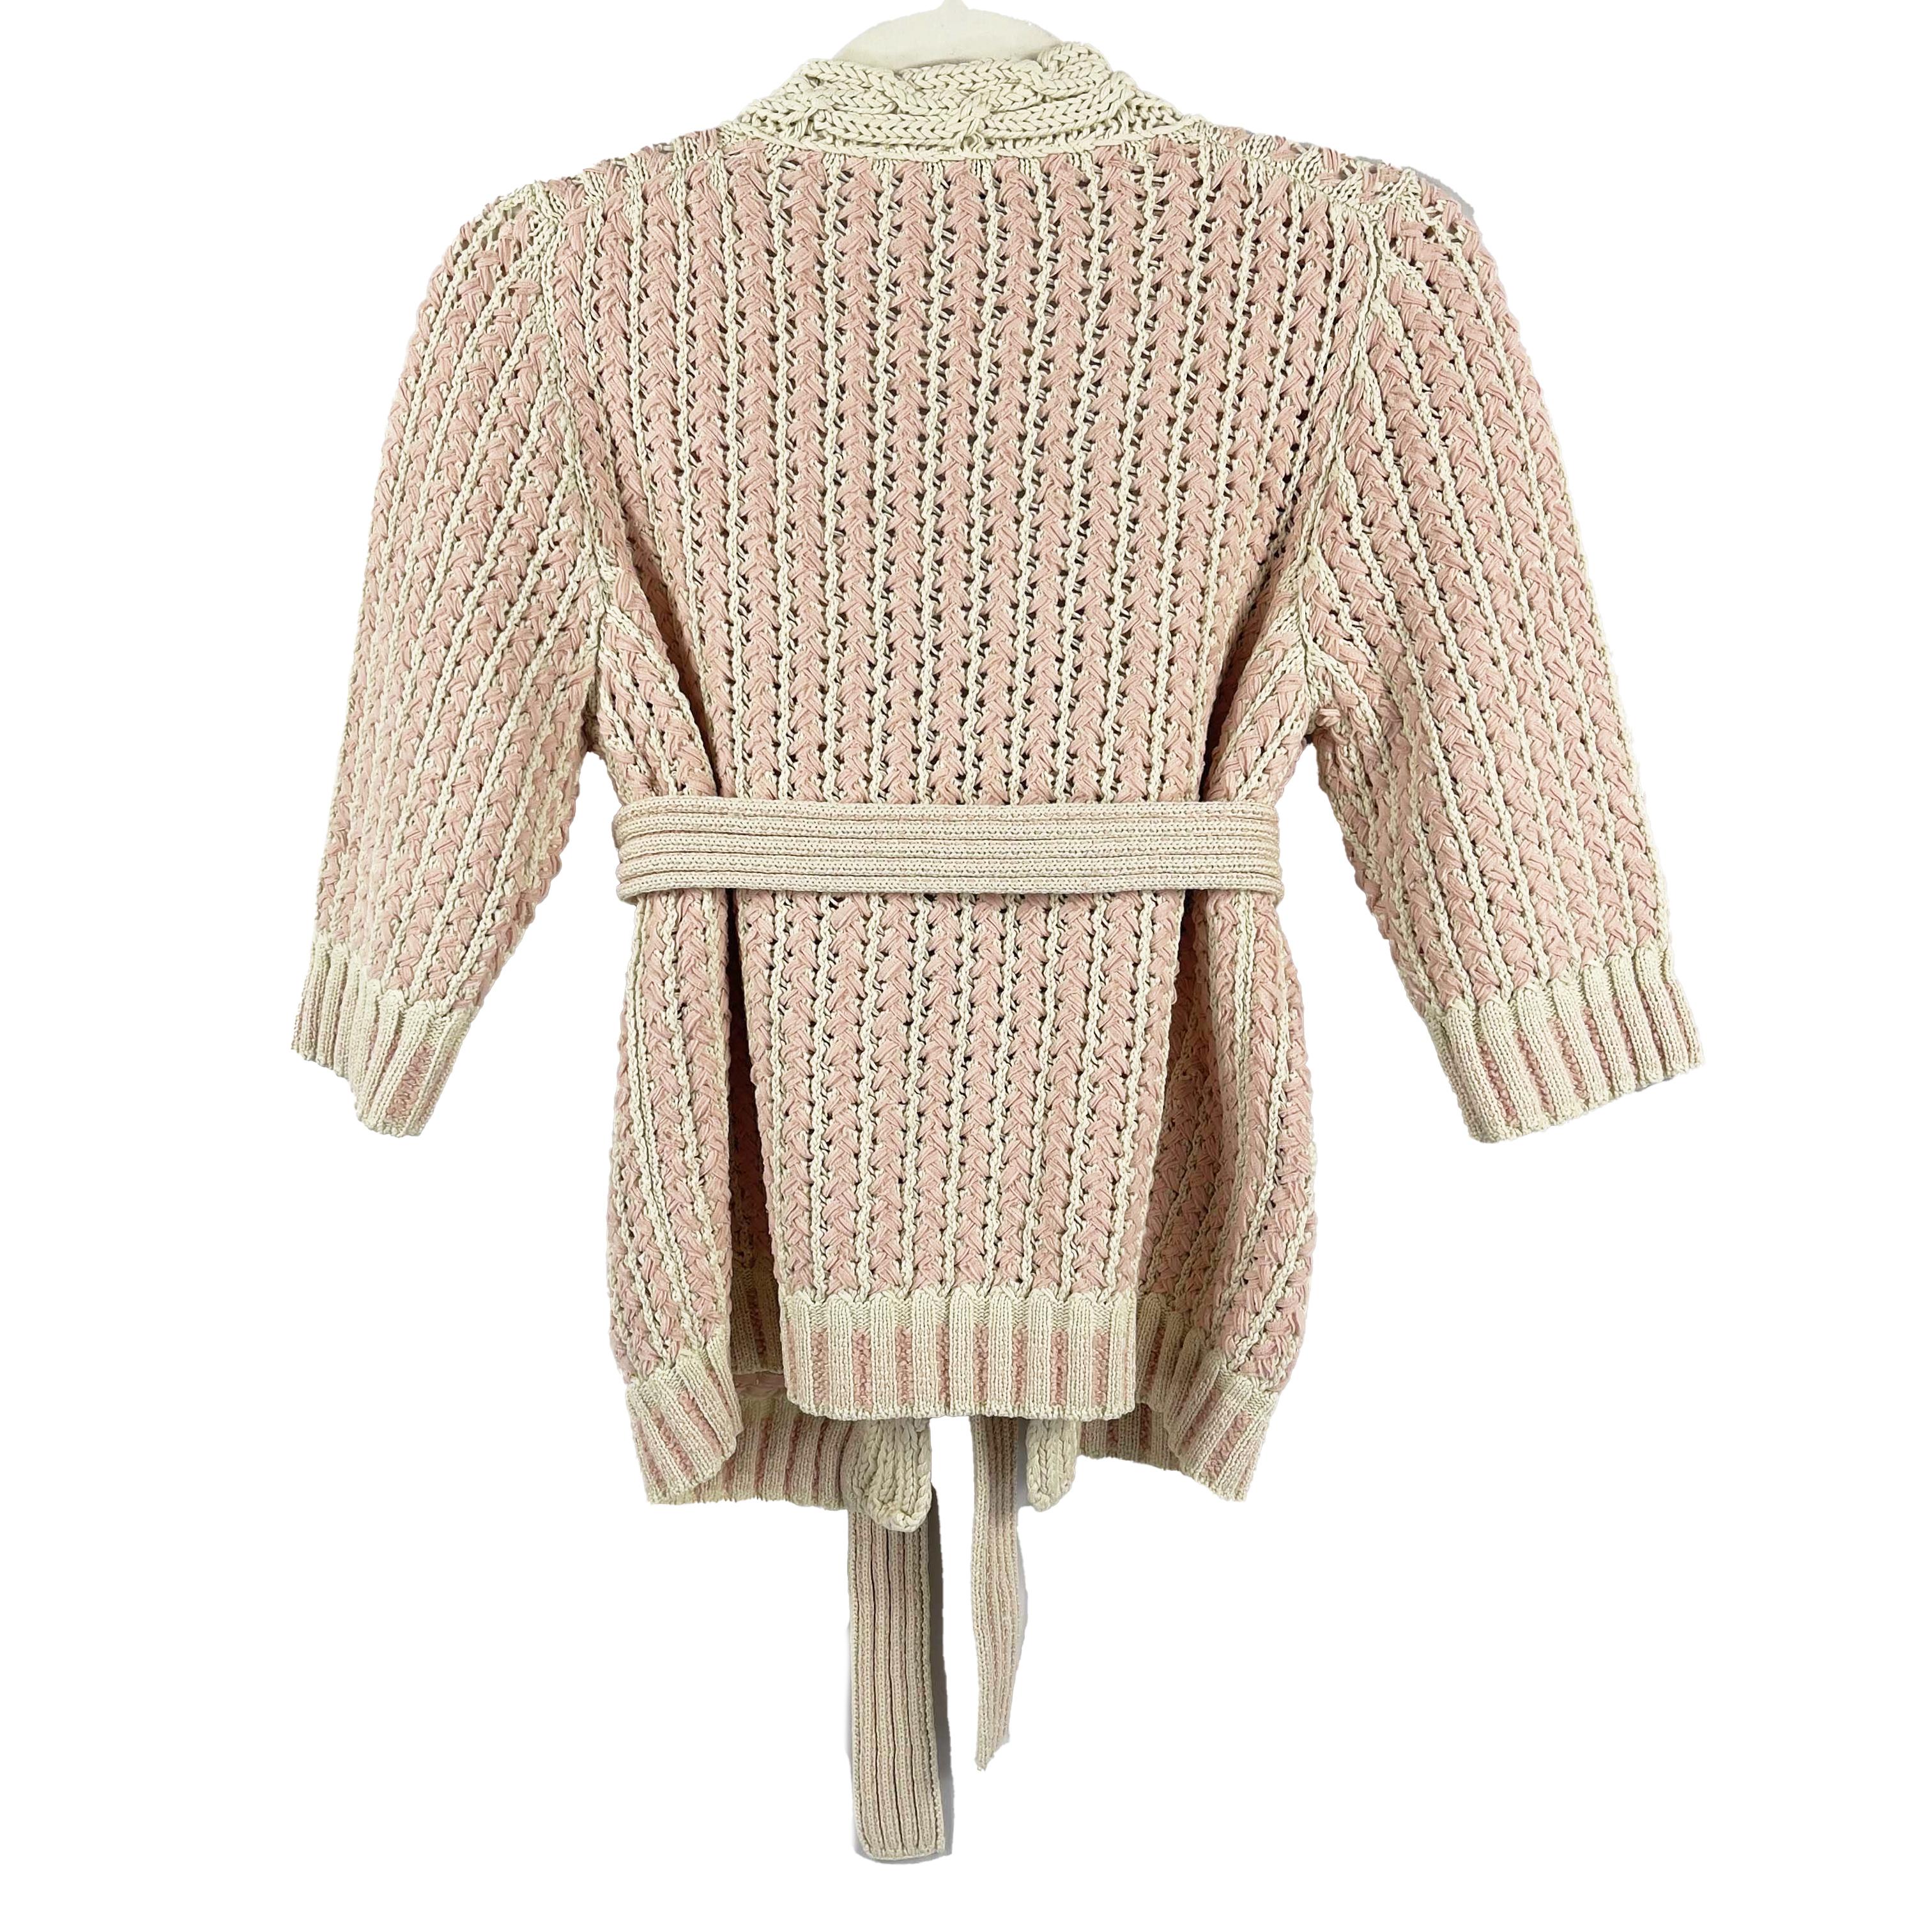 CHANEL -18P Cotton Blend Woven Knit Sweater - Pastel Pink / Ecru - 36 US 4

Description

From the Pre-Spring 2018 Collection.
Woven soft pink and ecru design with braided trim.
Open styling with sash tie closure at front and three quarter